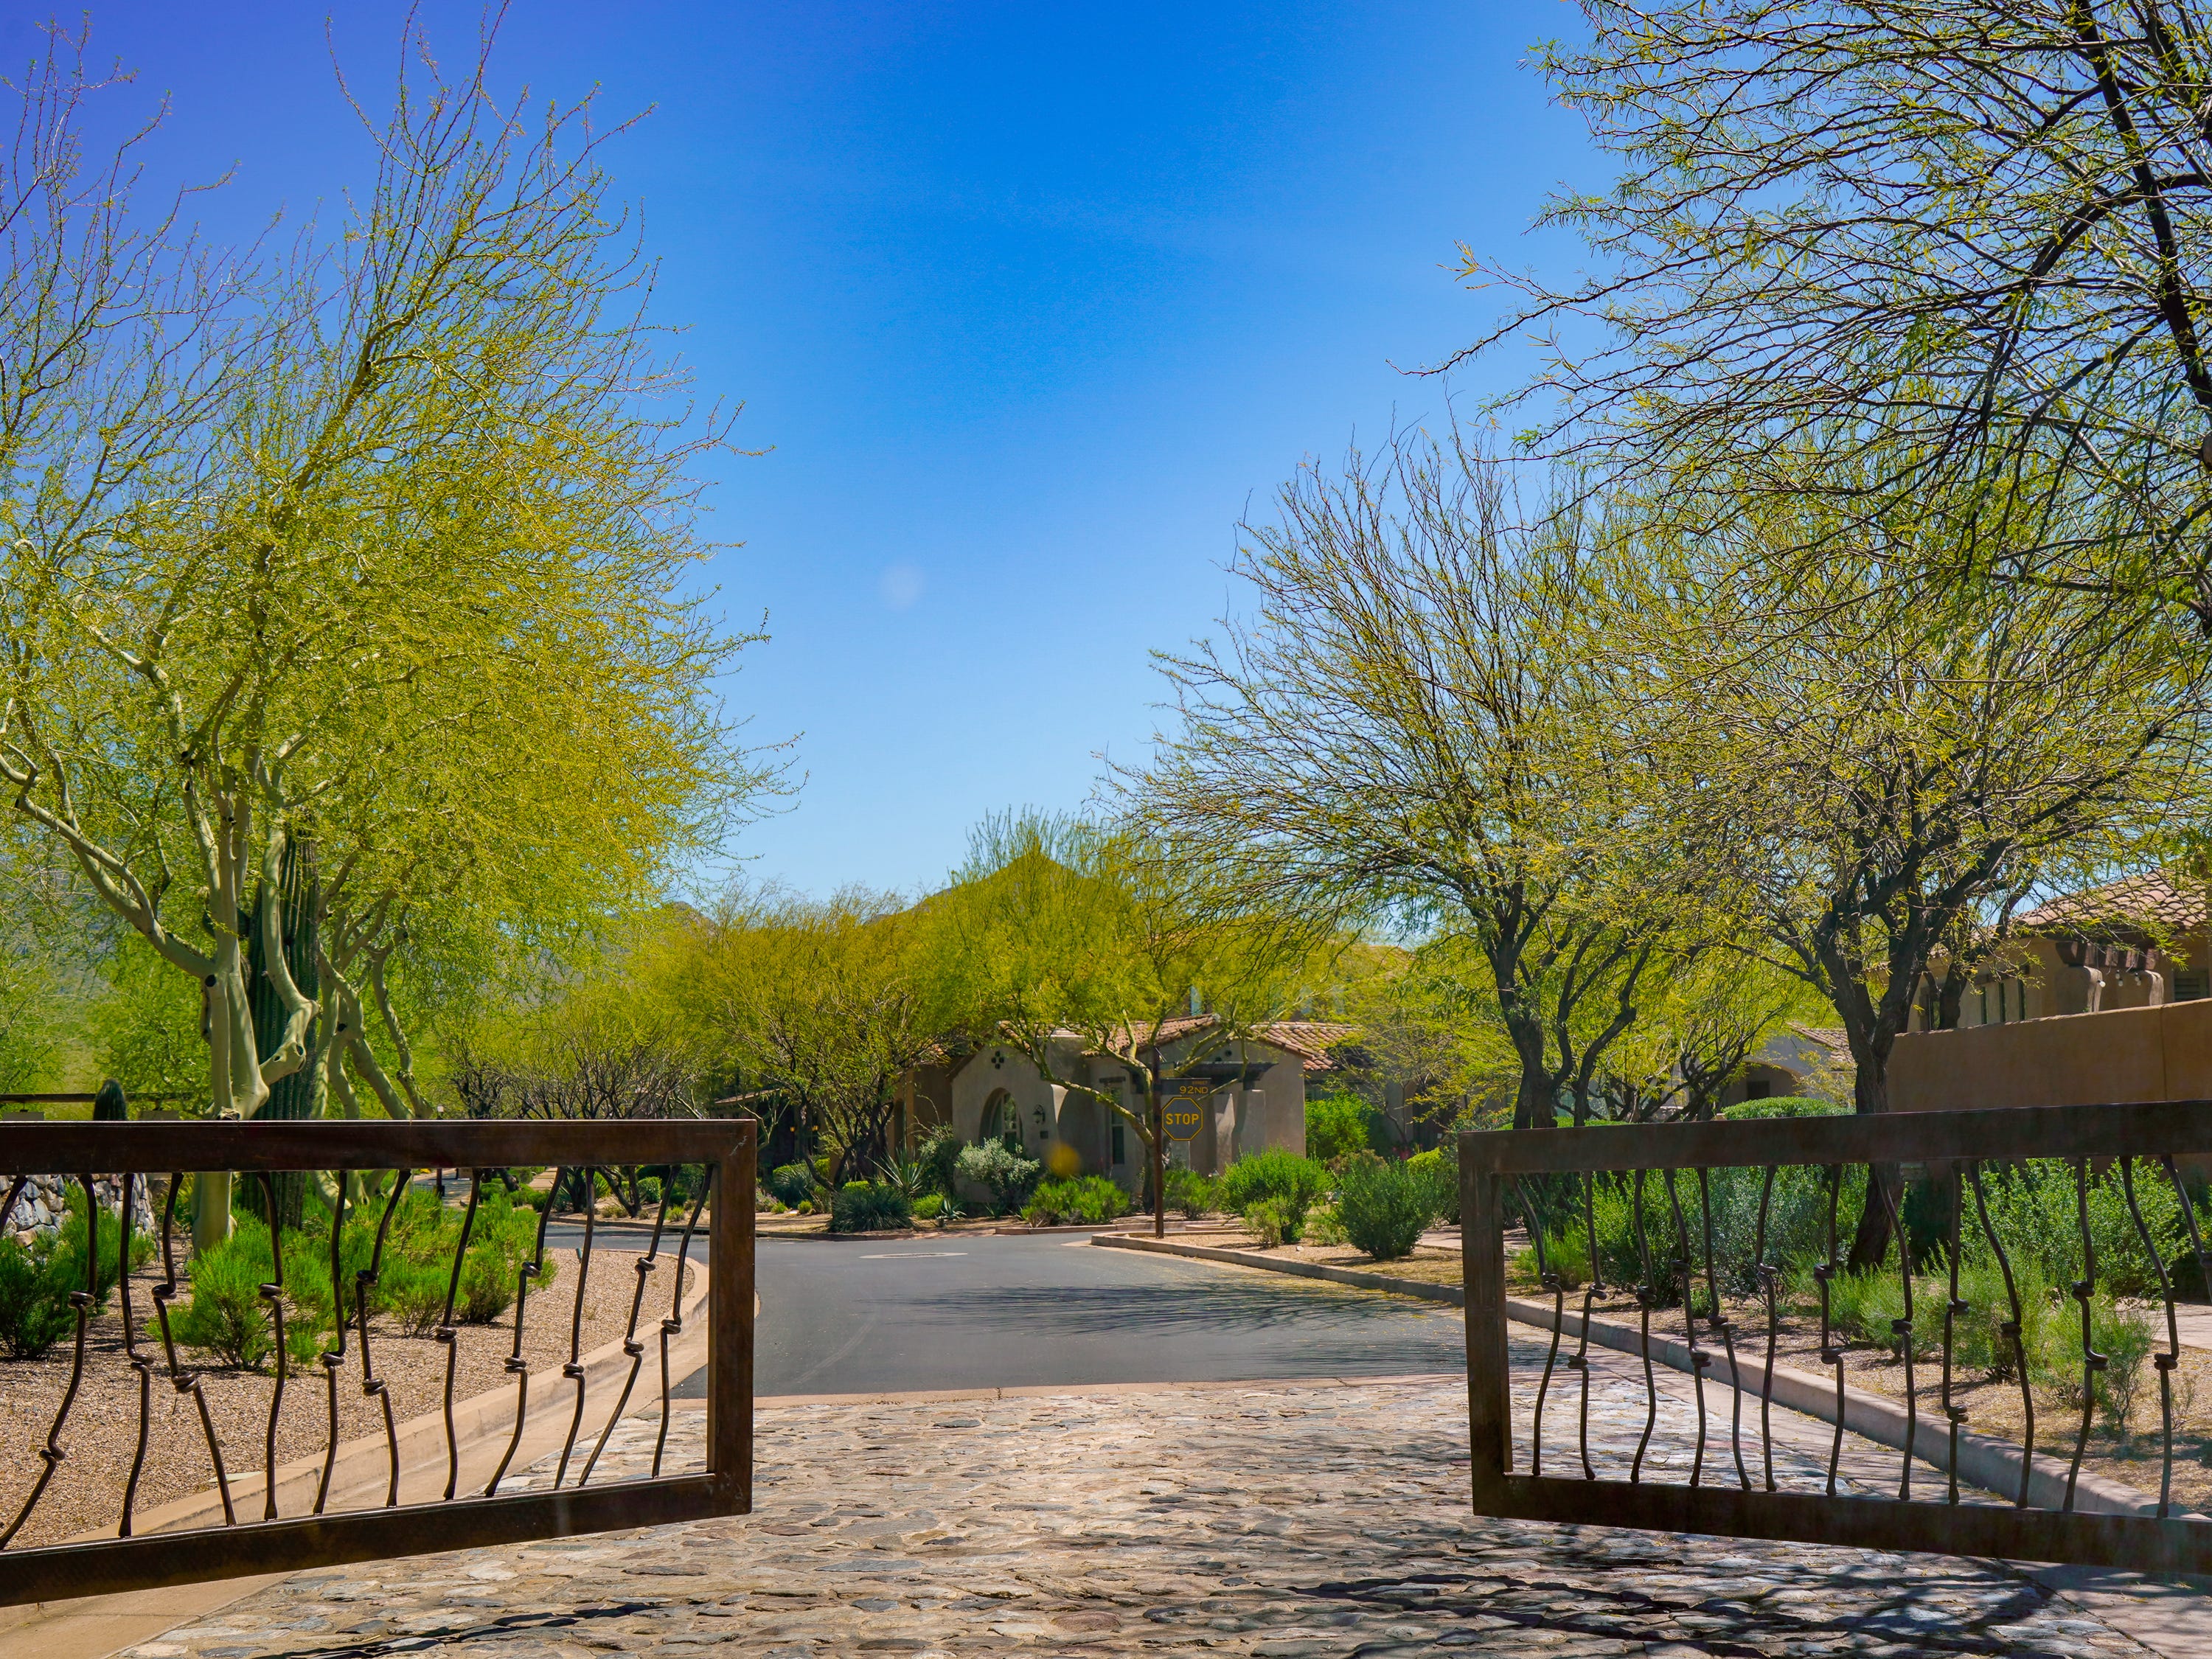 <p>Desert Parks Village is full of gated neighborhoods lined with single-family homes and <a href="https://www.businessinsider.com/new-york-city-resident-tours-austin-apartments-2000-per-month-2021-12">luxury apartments</a>. </p>